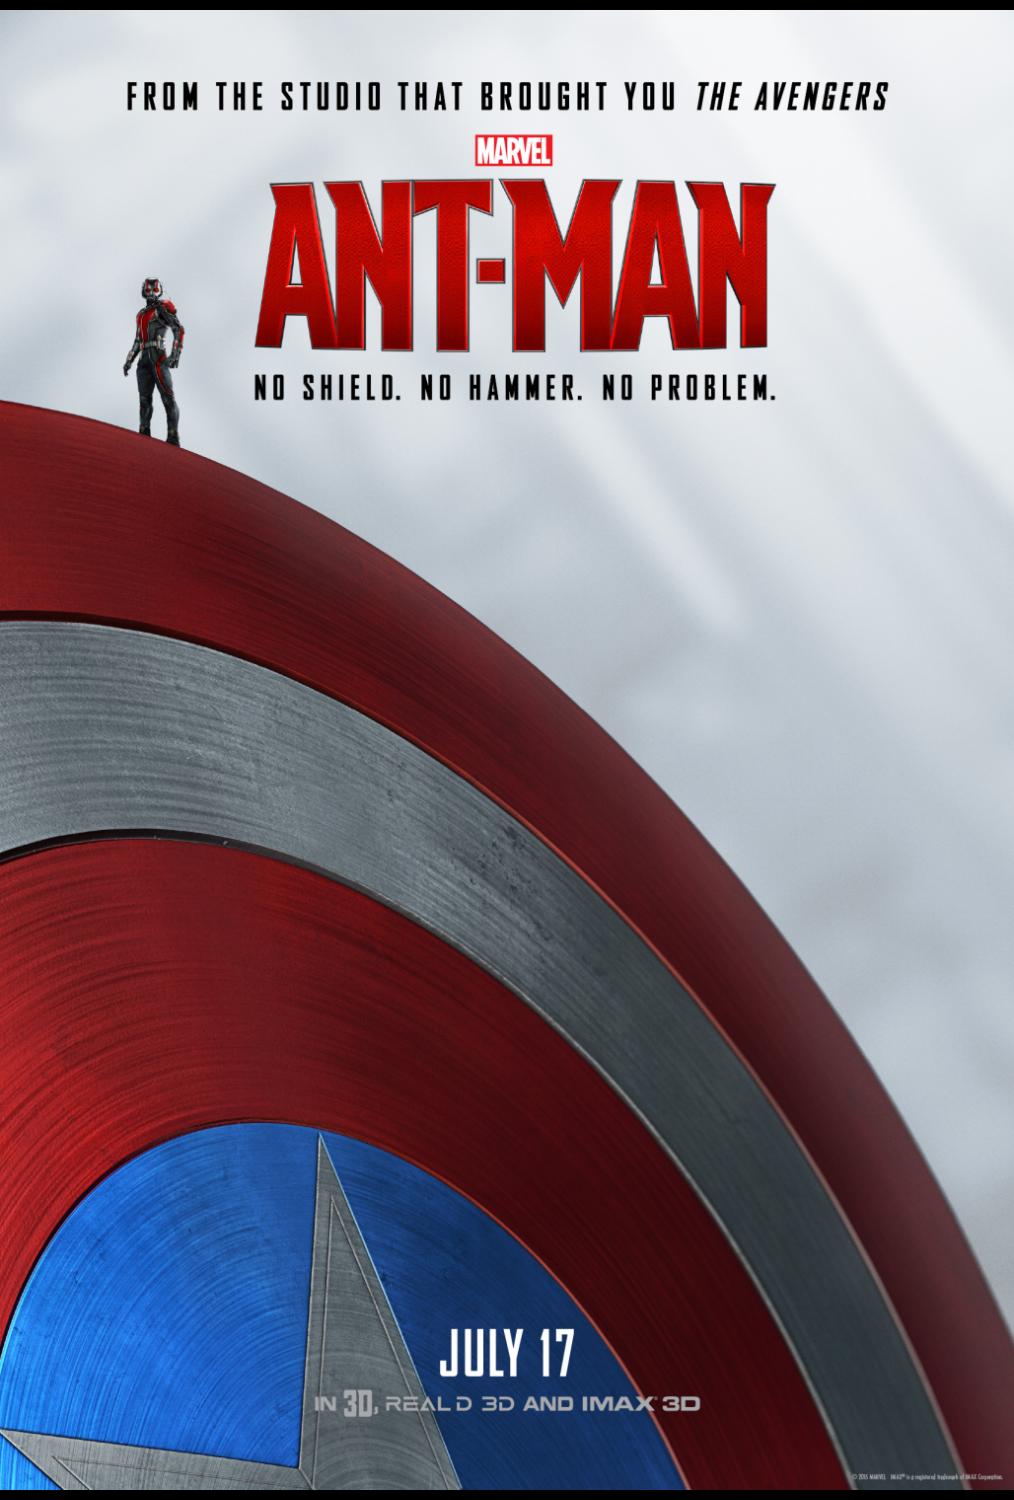 Marvel's Ant Man in Theaters 7/17 #AntMan